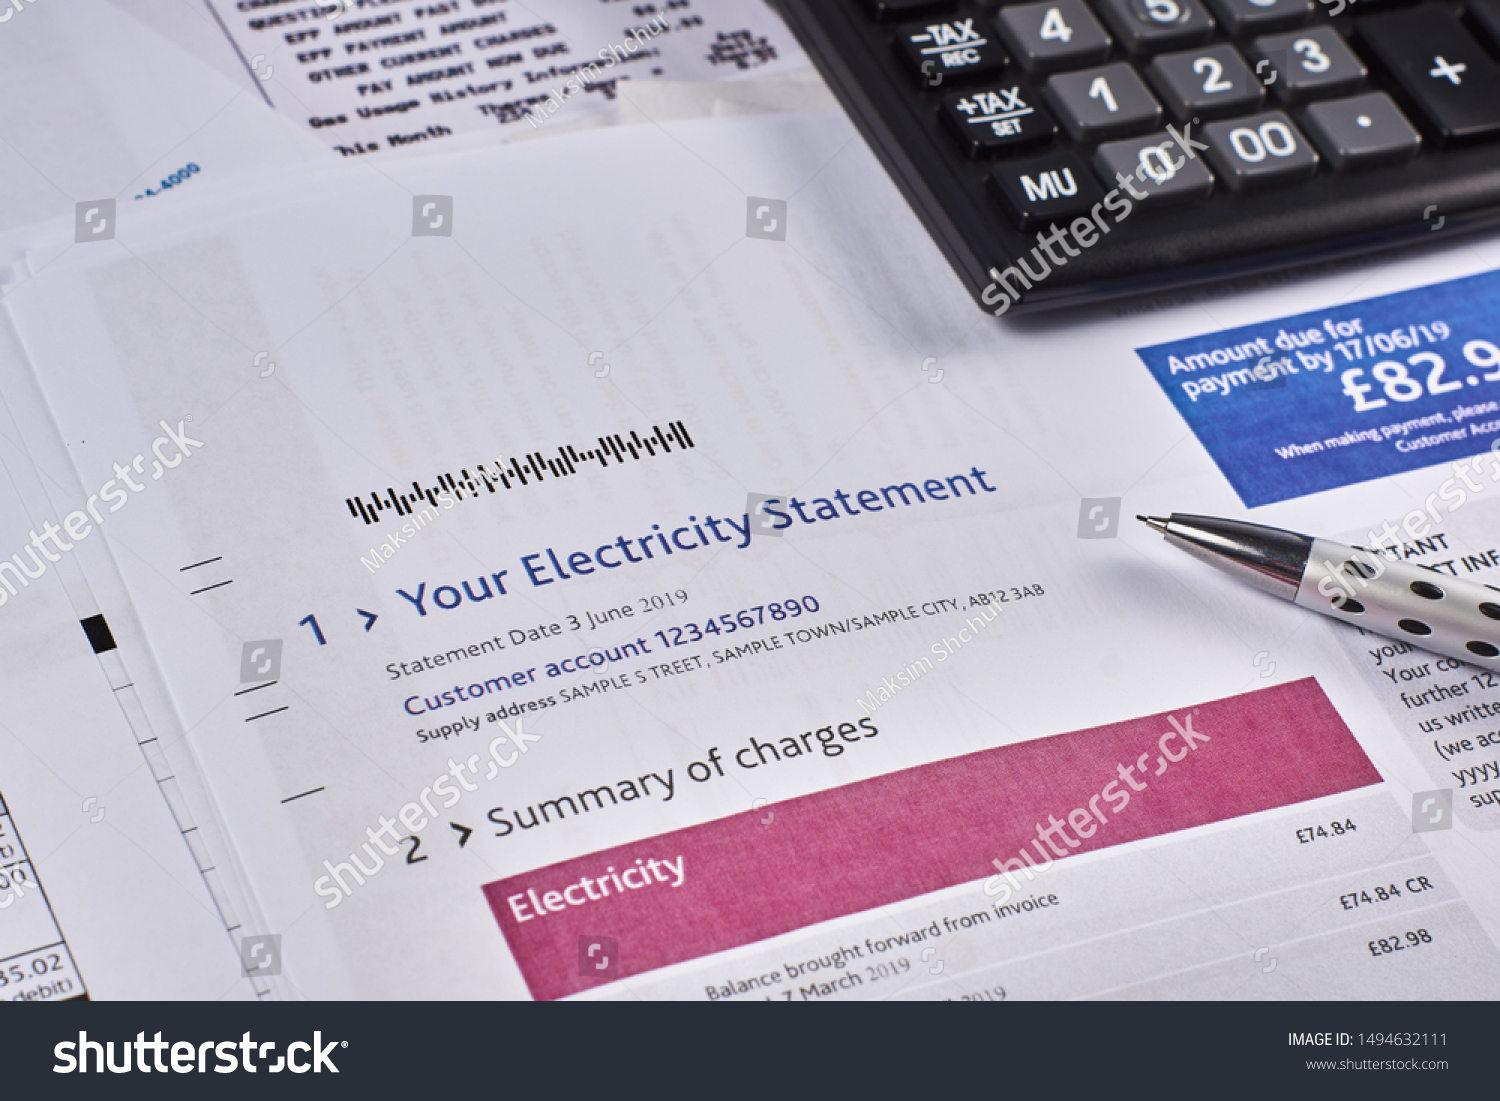 Electricity statement sheet with calculator and pen. Close-up #1494632111